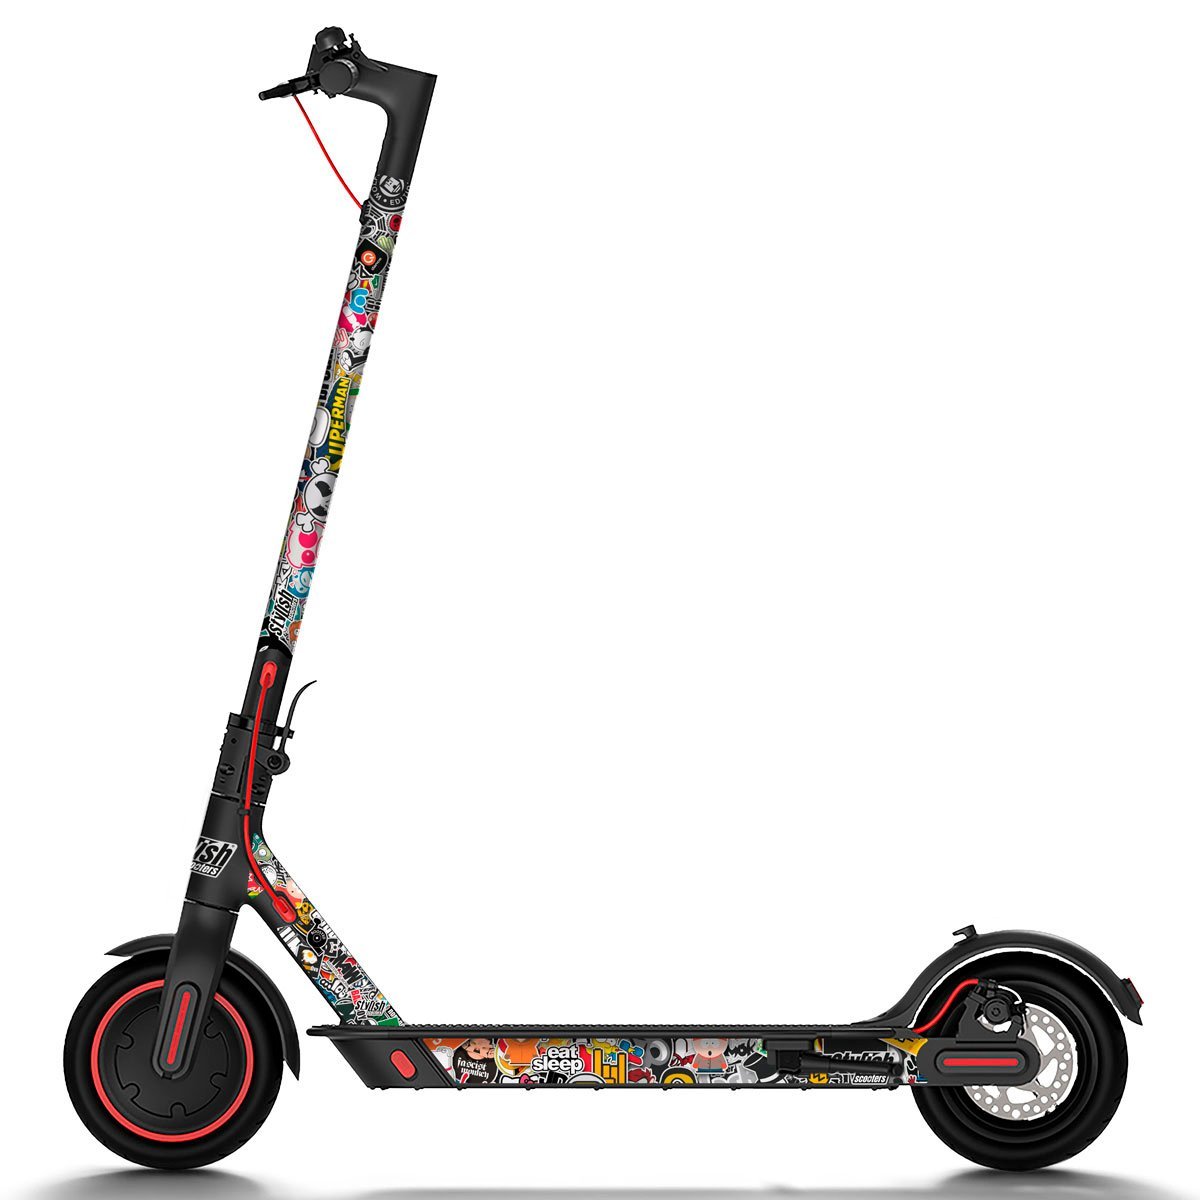 Vinyl Sticker Bomb for Xiaomi m365 scooter – Stylish Scooters